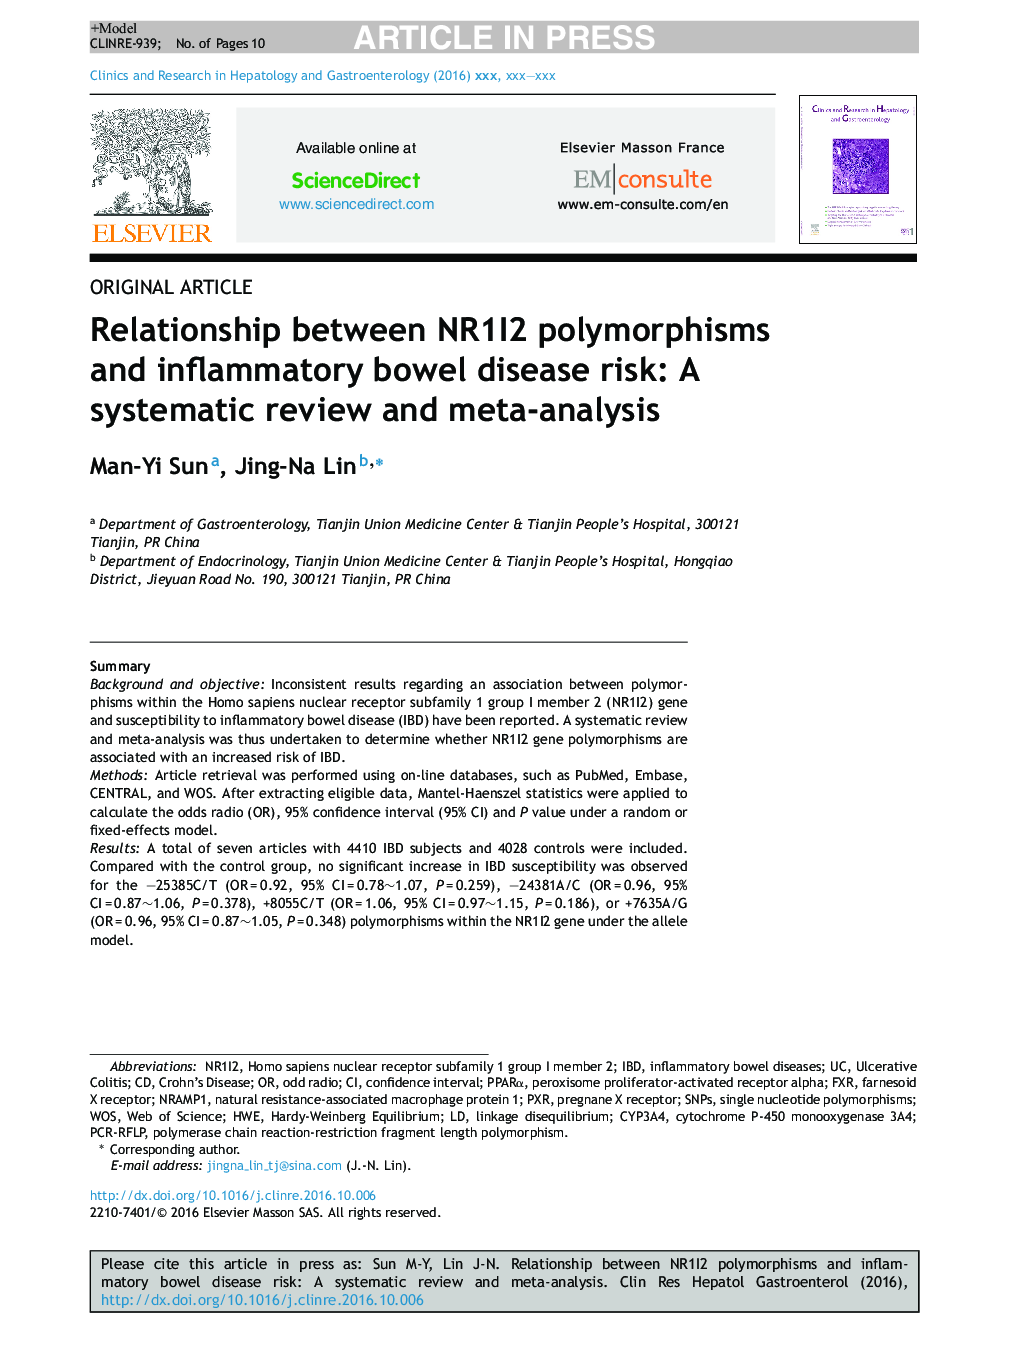 Relationship between NR1I2 polymorphisms and inflammatory bowel disease risk: A systematic review and meta-analysis